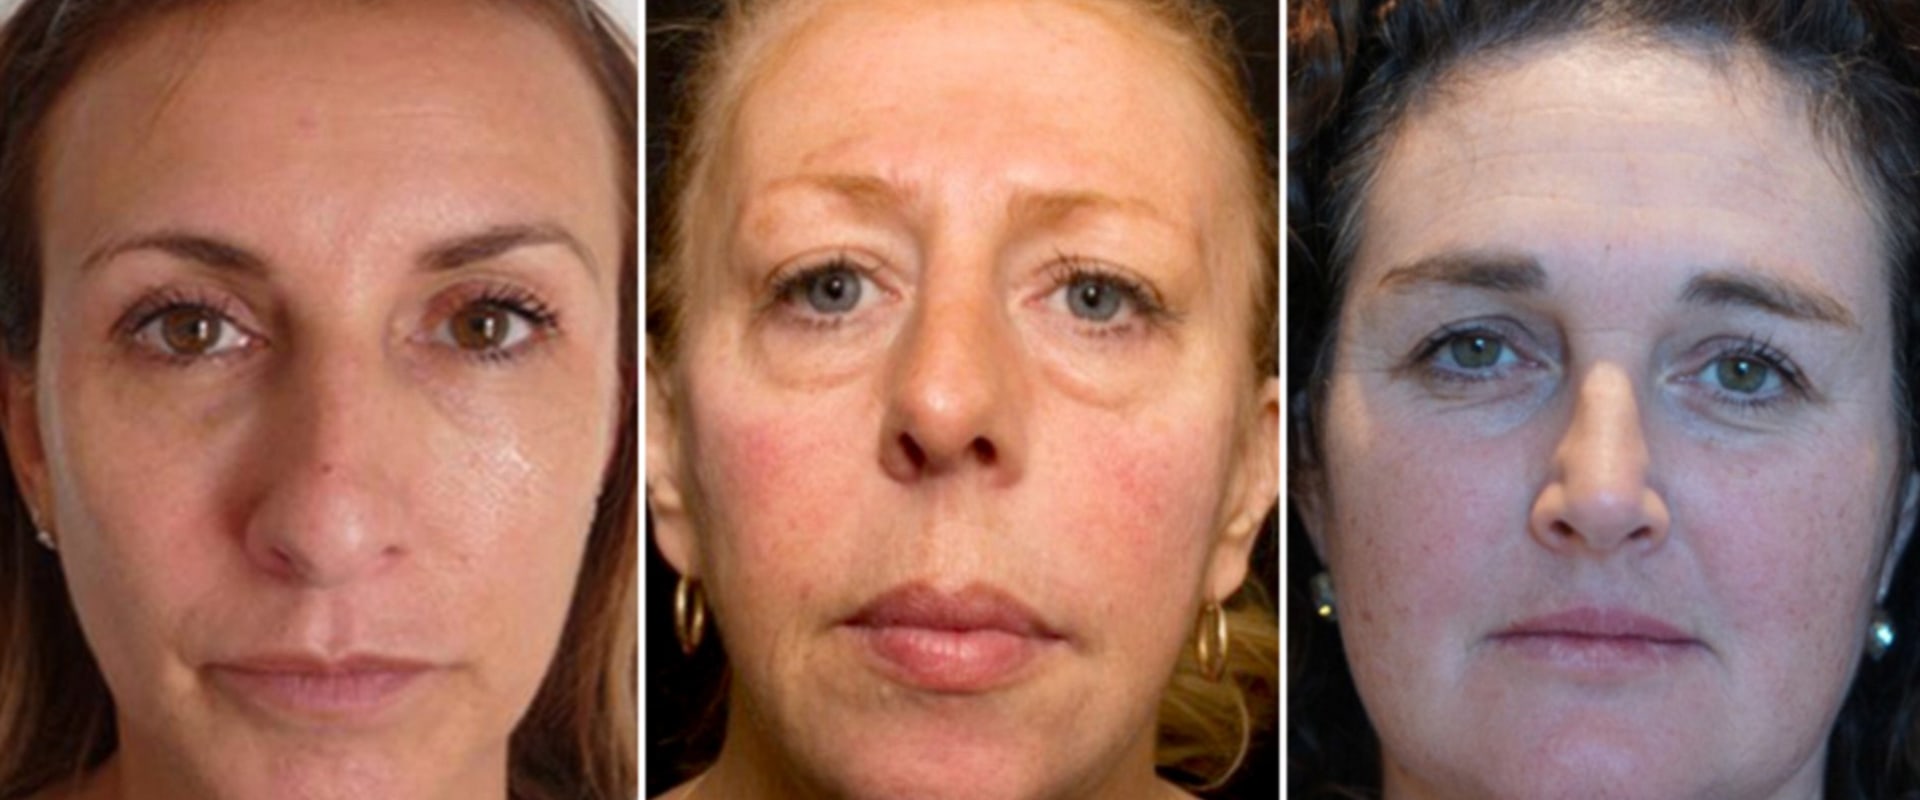 Do Fillers Make You Look Older After They're Gone?